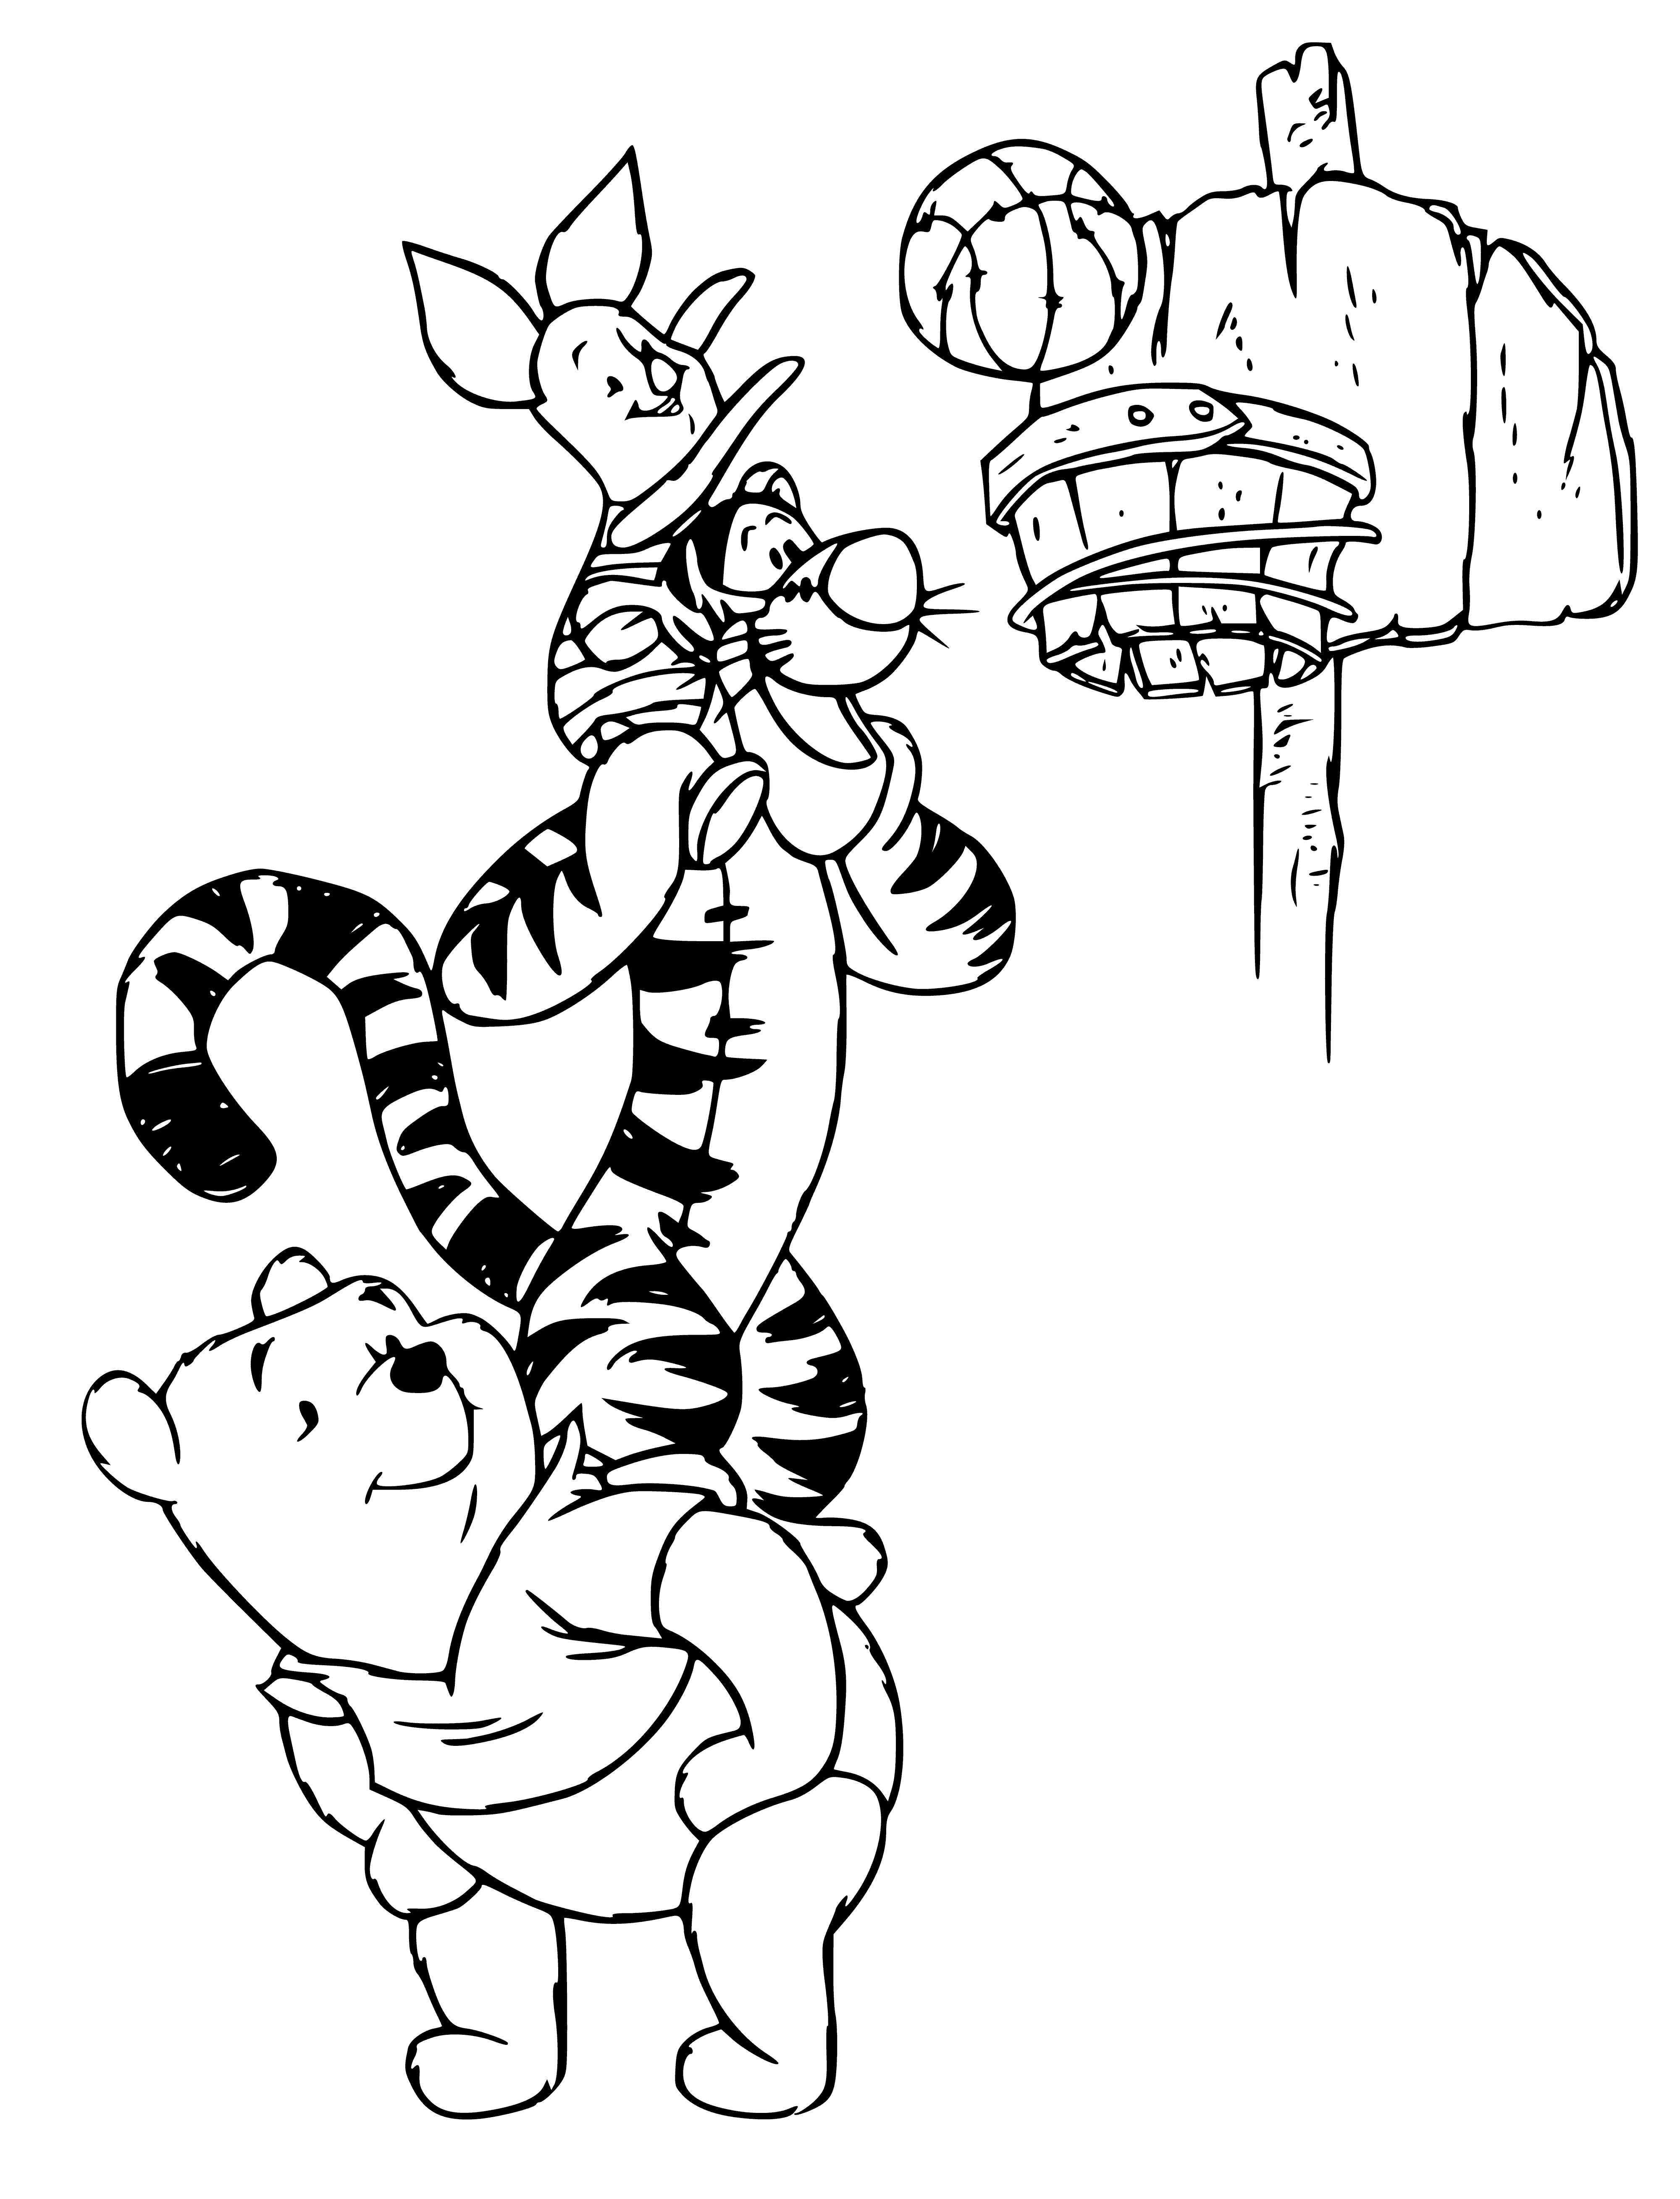 coloring page: Group of toys, including a bear holding a b-ball, watched by other animals in a coloring page.